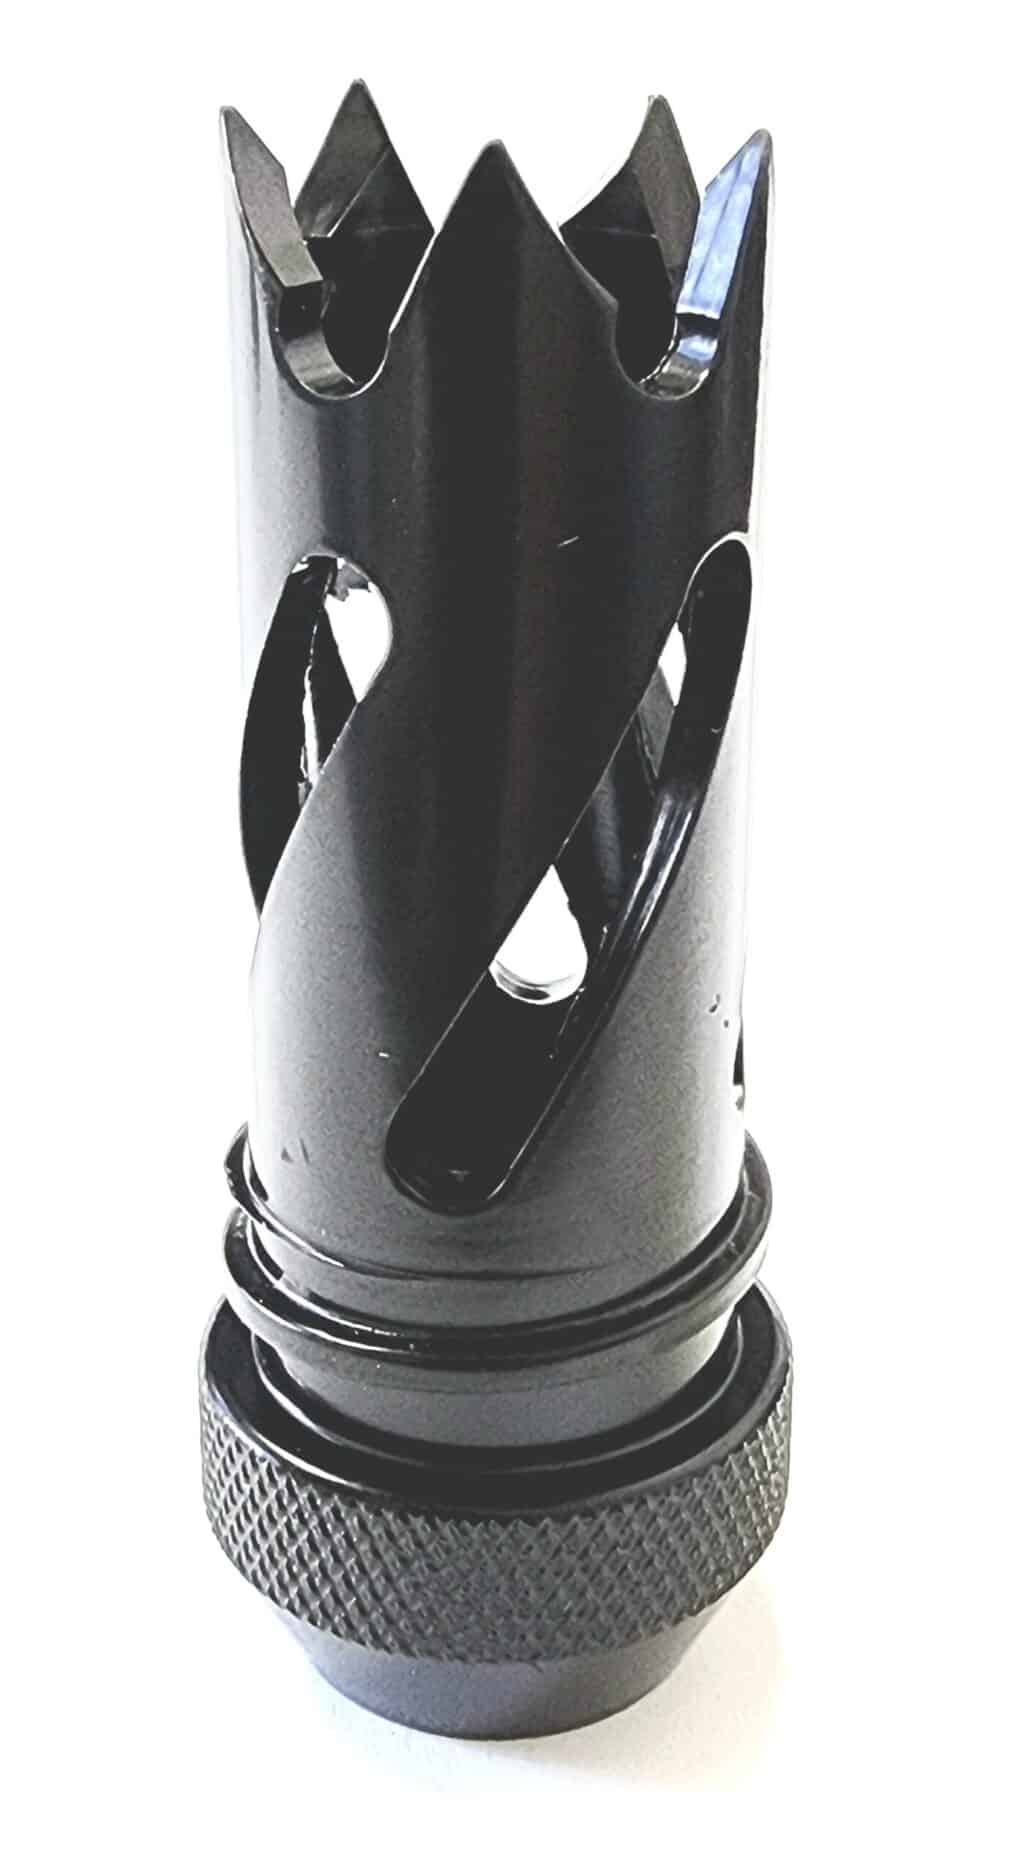 Muzzle Brake 1 or 5 Flash Hider Compensator Compatible With Solvent Trap Kit D Sized Quick Connect